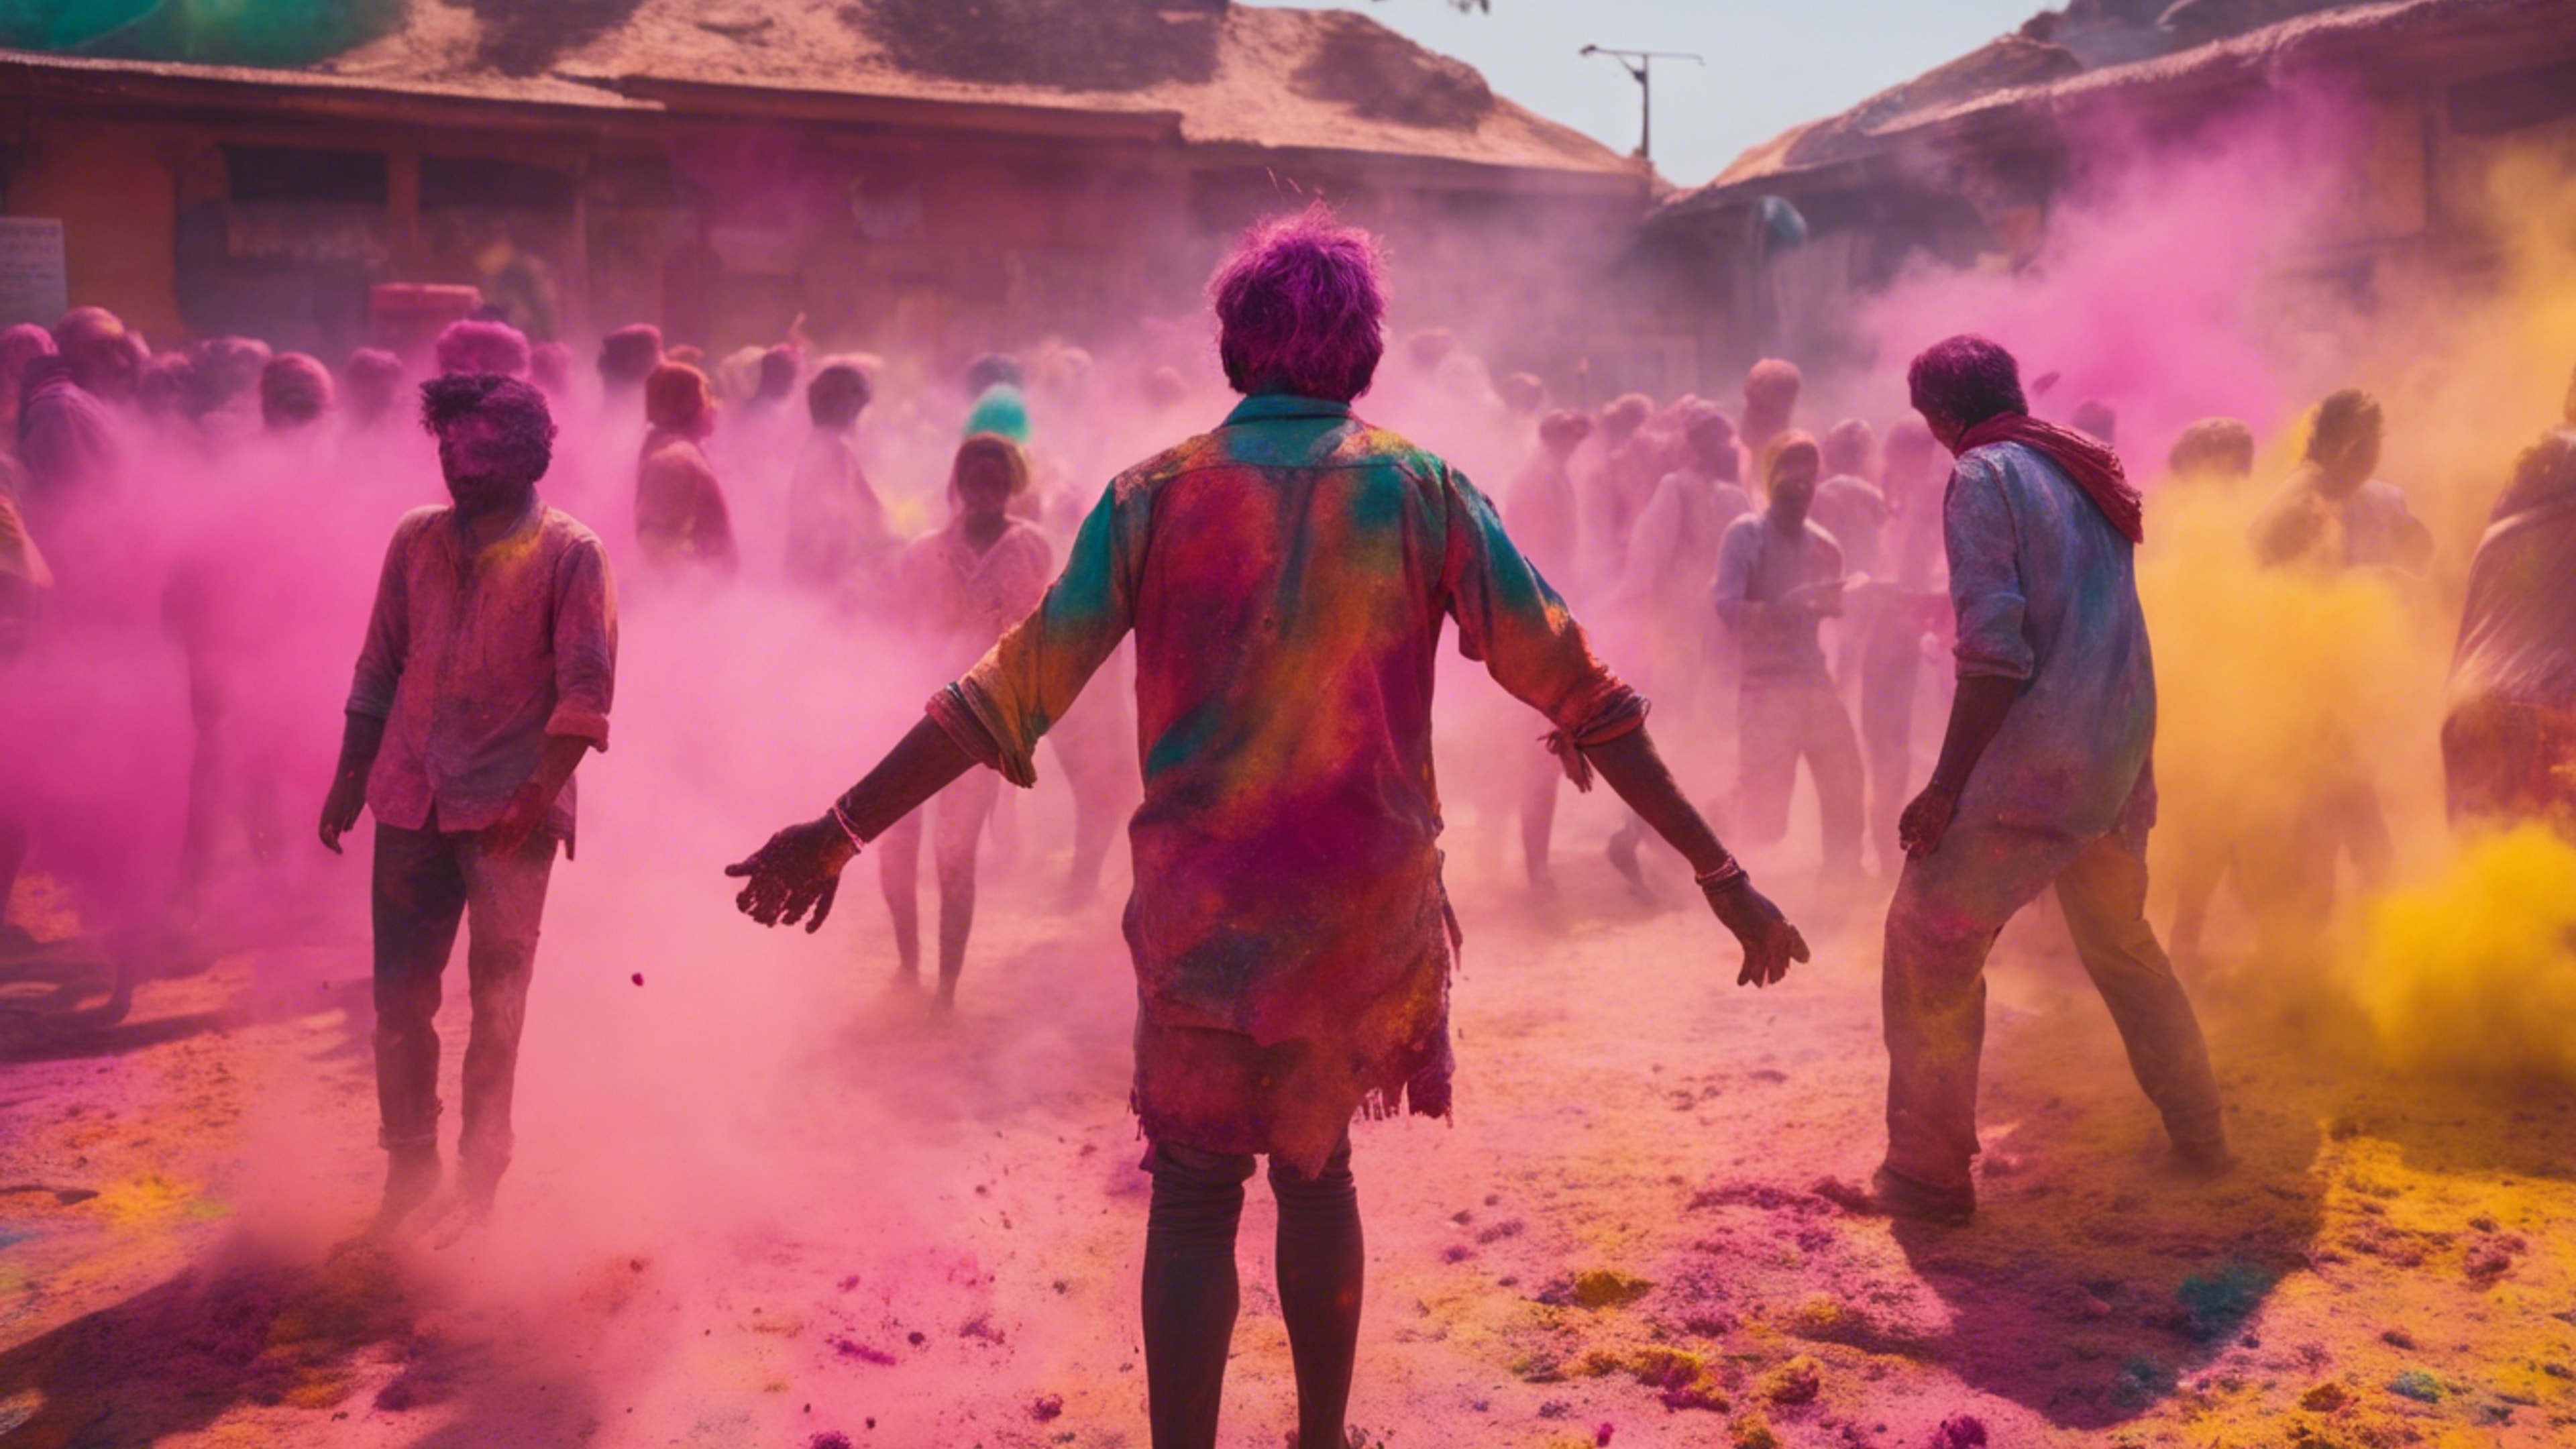 A vibrant and colorful Holi festival with people throwing powdered colors and laughing in the backdrop of an old Indian city. Fondo de pantalla[6dae05cbdf264a67bd16]